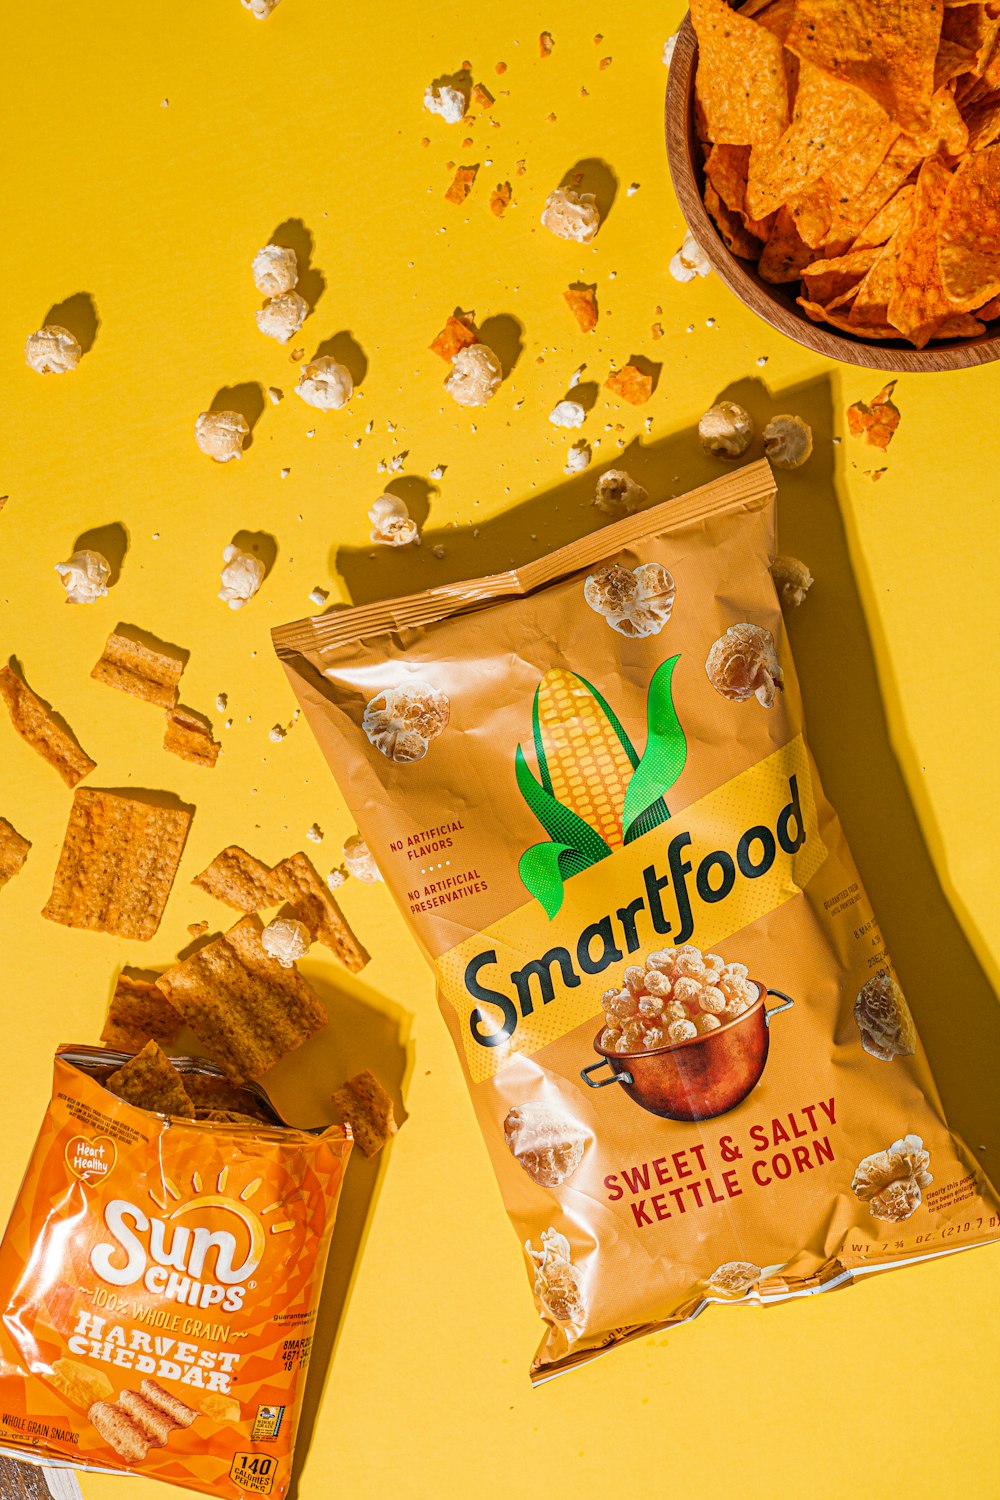 a bag of smartfood next to a bowl of chips